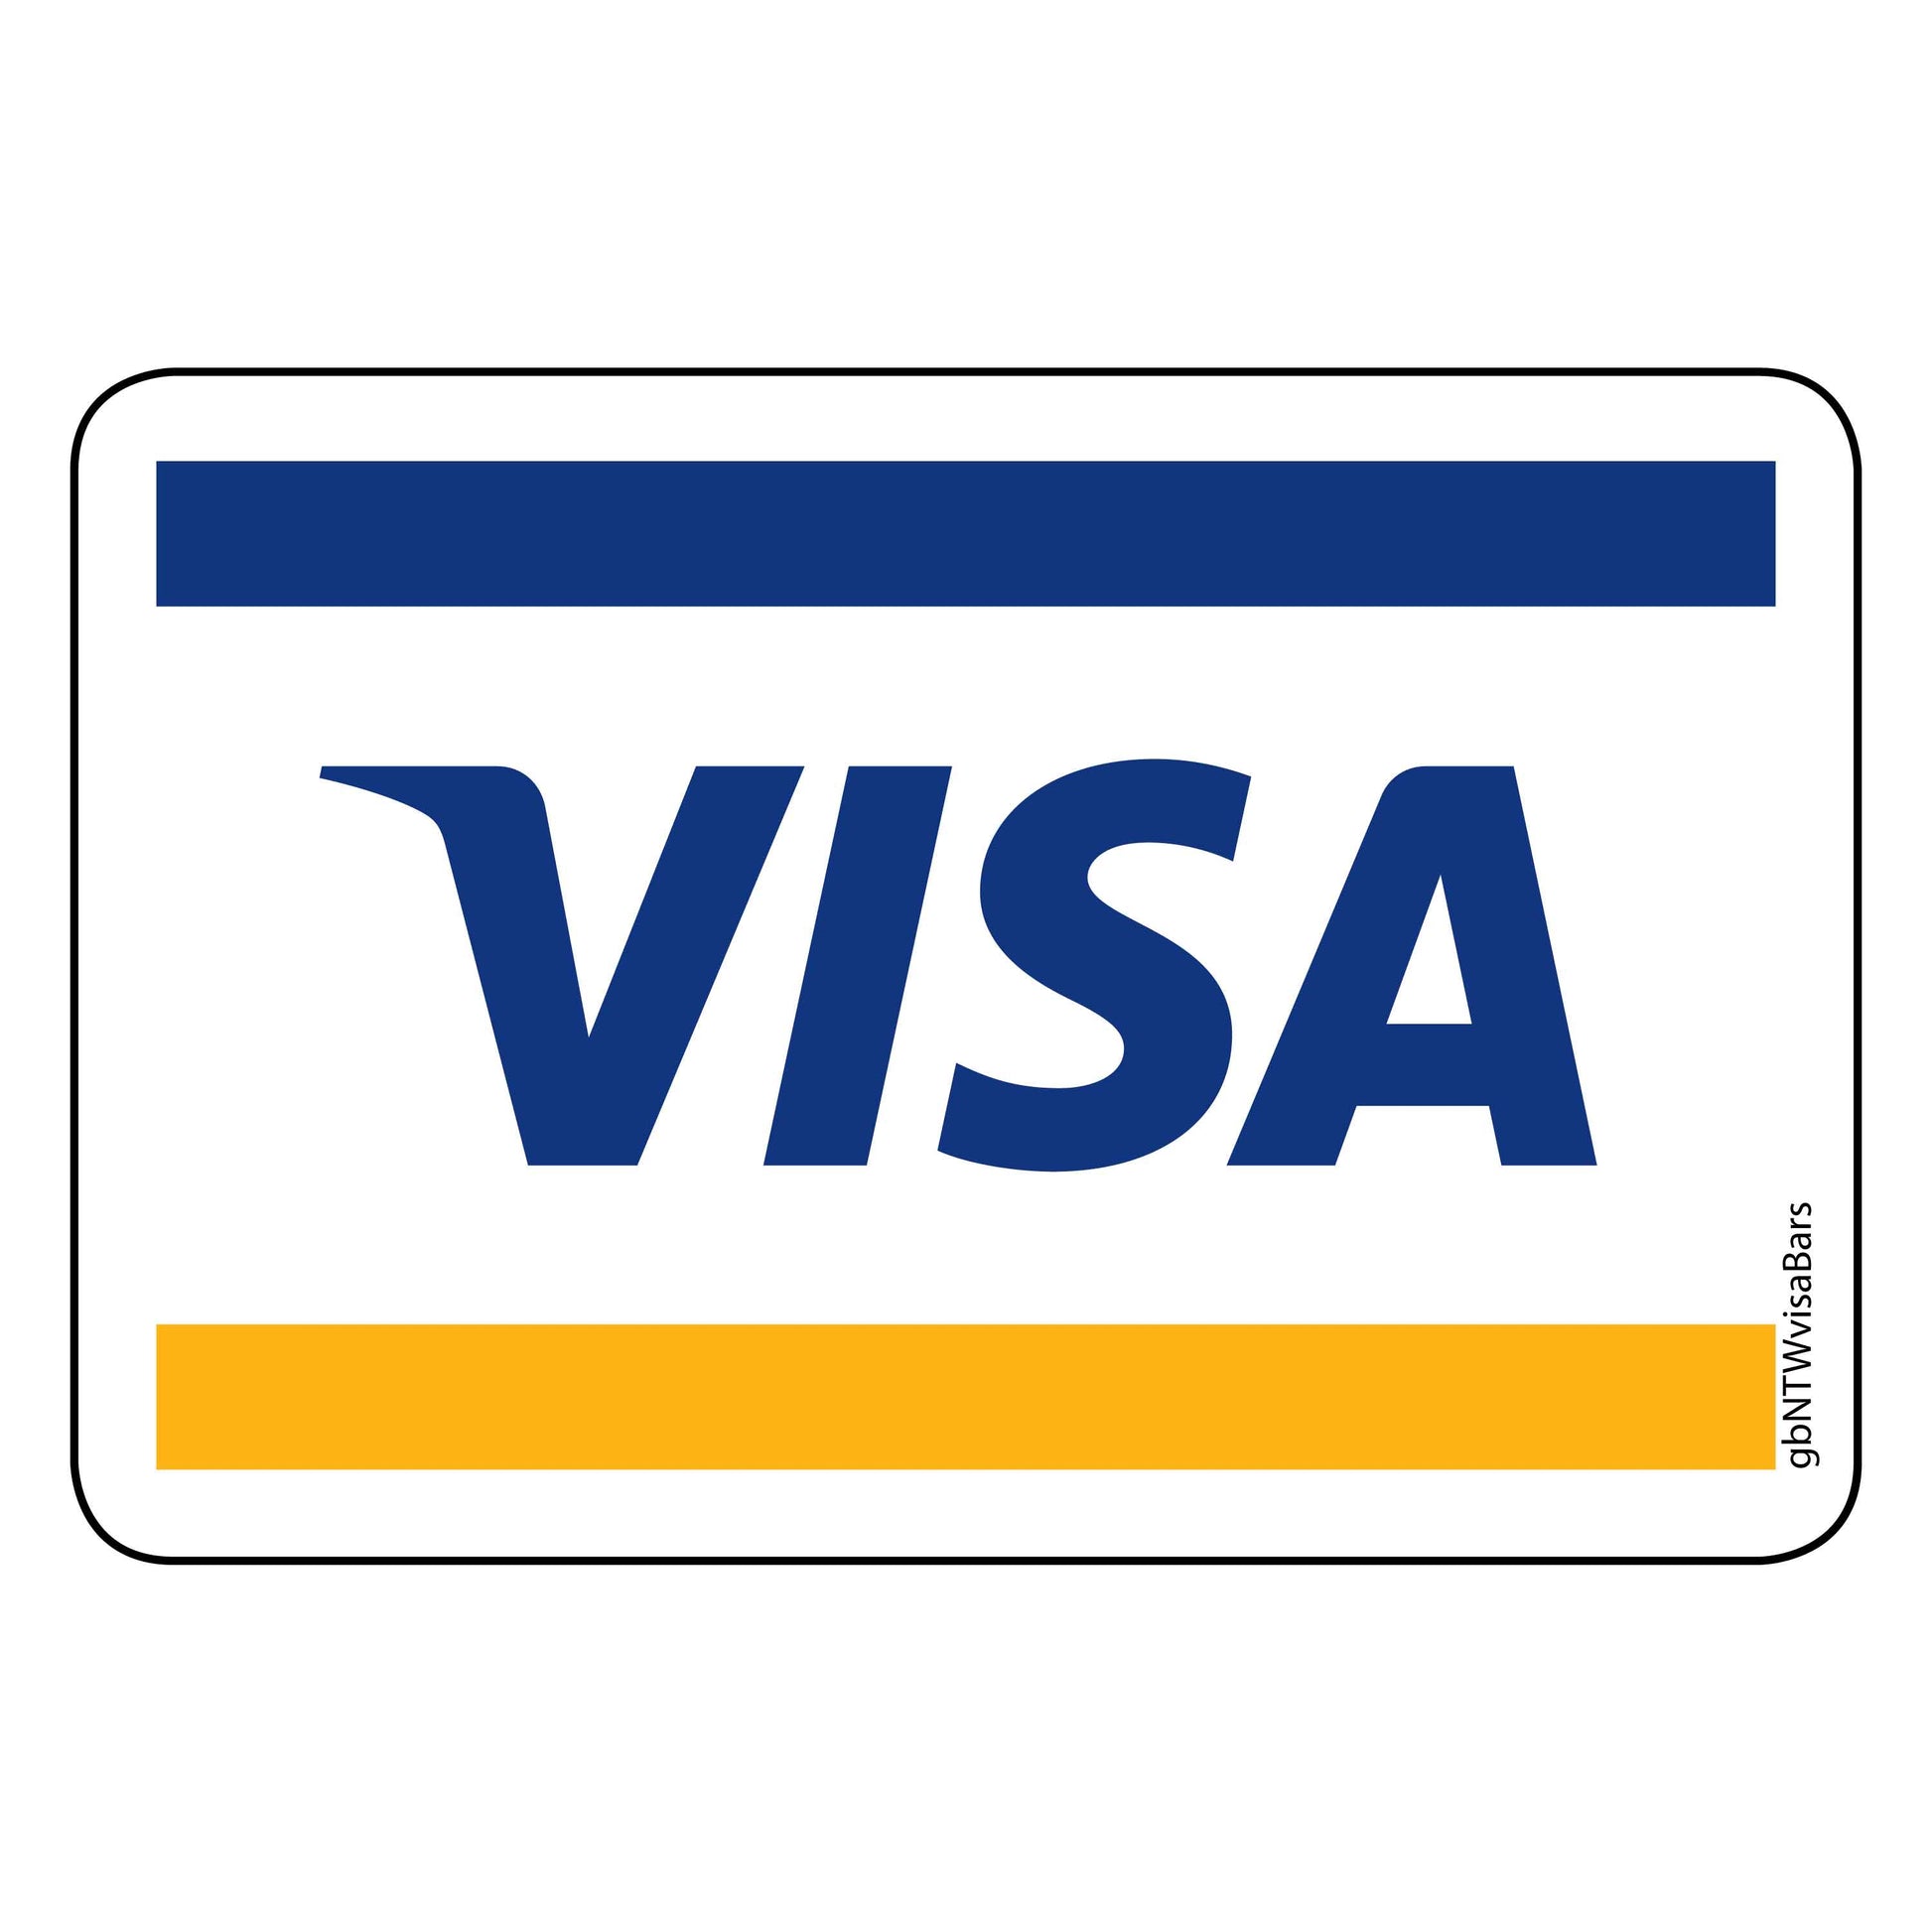 Single Network ATM Decal, Visa. 3 inches by 2 inches in size. 